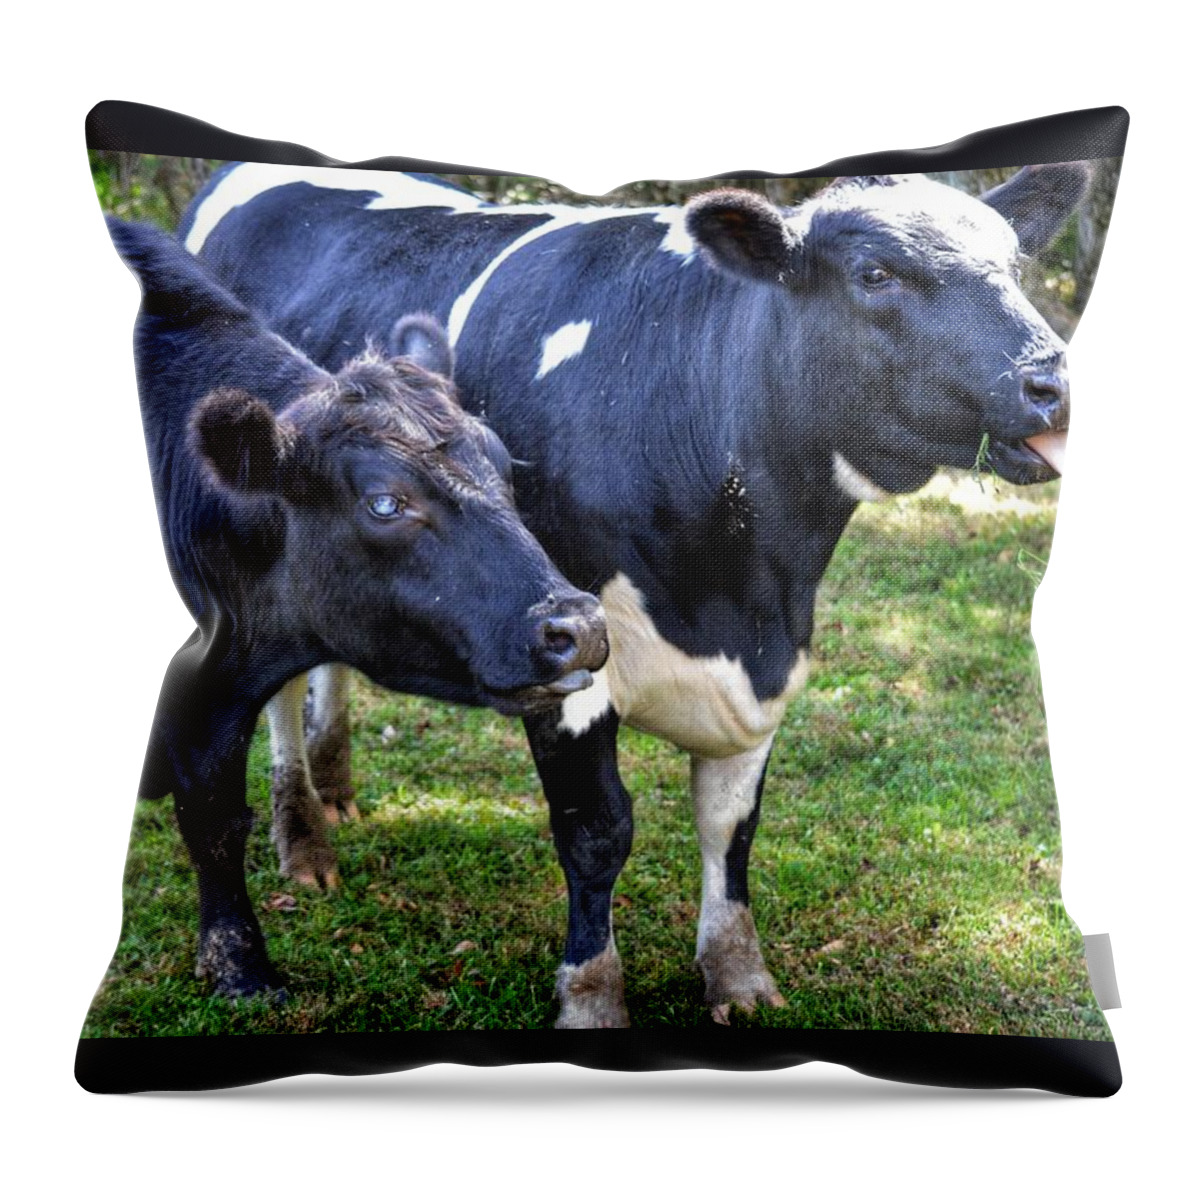 Cows Throw Pillow featuring the photograph Cows sticking out tongues by Joseph Caban